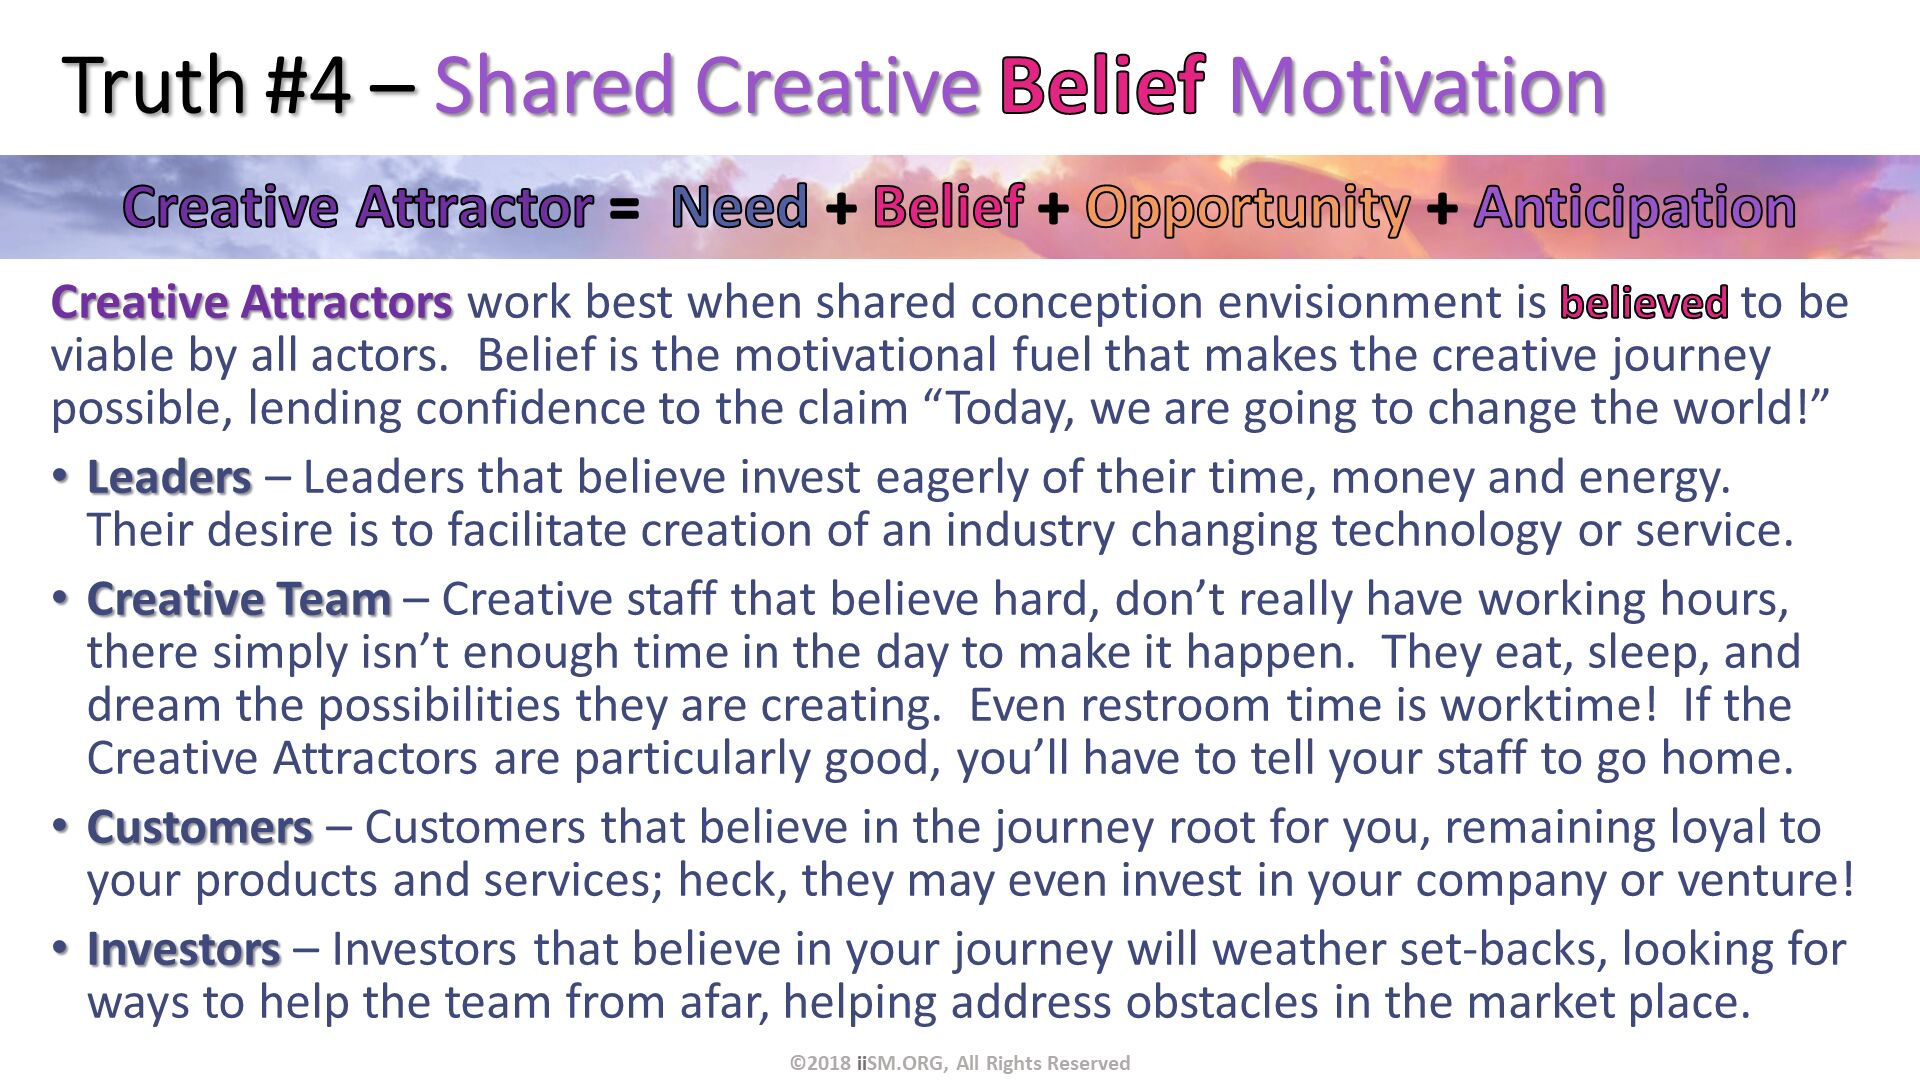 Truth #4 – Shared Creative Belief Motivation. Creative Attractors work best when shared conception envisionment is believed to be viable by all actors.  Belief is the motivational fuel that makes the creative journey possible, lending confidence to the claim “Today, we are going to change the world!”
Leaders – Leaders that believe invest eagerly of their time, money and energy.  Their desire is to facilitate creation of an industry changing technology or service.
Creative Team – Creative staff that believe hard, don’t really have working hours, there simply isn’t enough time in the day to make it happen.  They eat, sleep, and dream the possibilities they are creating.  Even restroom time is worktime!  If the Creative Attractors are particularly good, you’ll have to tell your staff to go home.
Customers – Customers that believe in the journey root for you, remaining loyal to your products and services; heck, they may even invest in your company or venture!
Investors – Investors that believe in your journey will weather set-backs, looking for ways to help the team from afar, helping address obstacles in the market place.  . ©2018 iiSM.ORG, All Rights Reserved. 